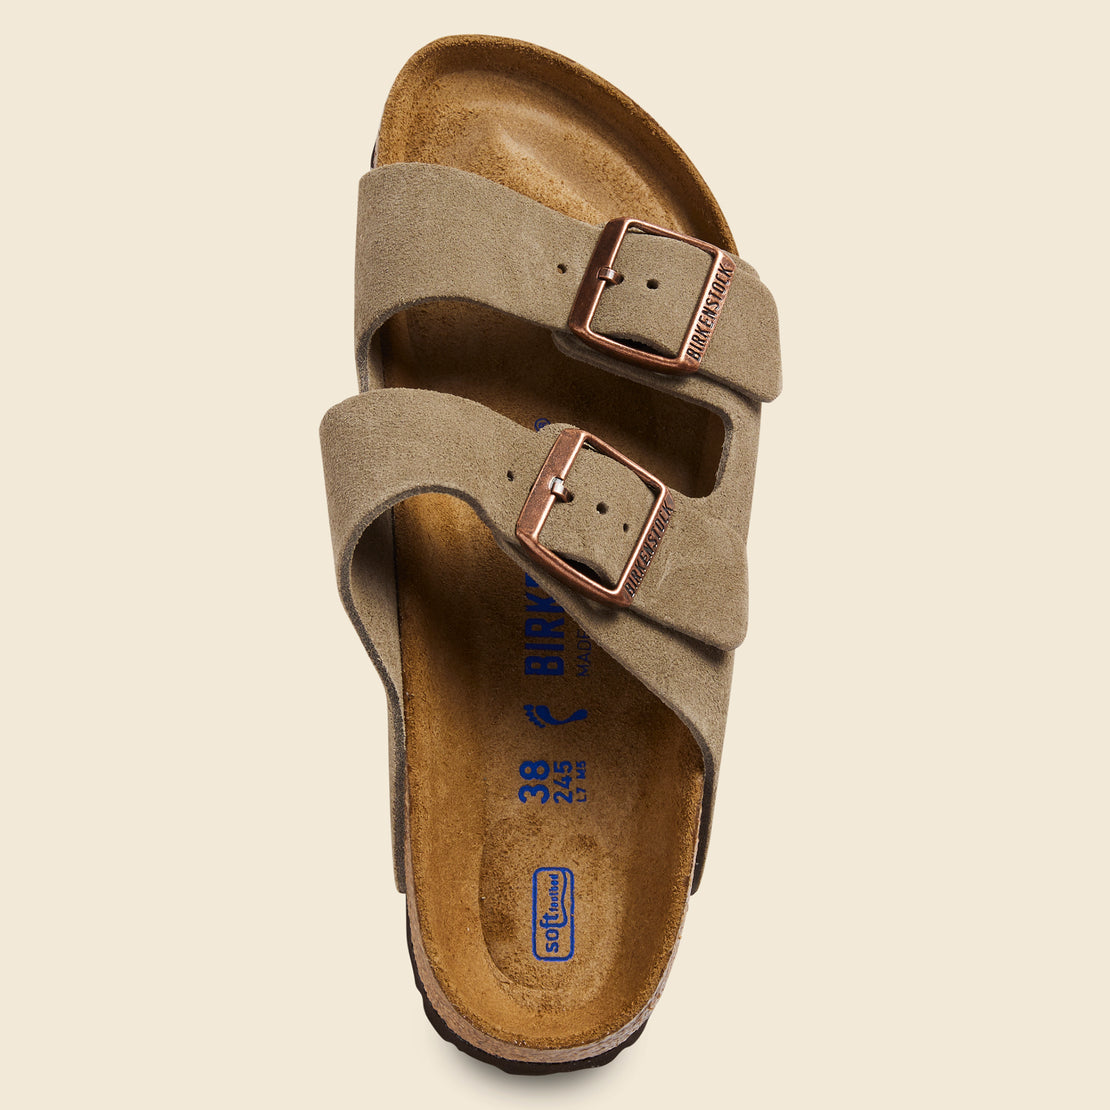 Arizona Soft Footbed - Taupe Suede - Birkenstock - STAG Provisions - W - Shoes - Sandals